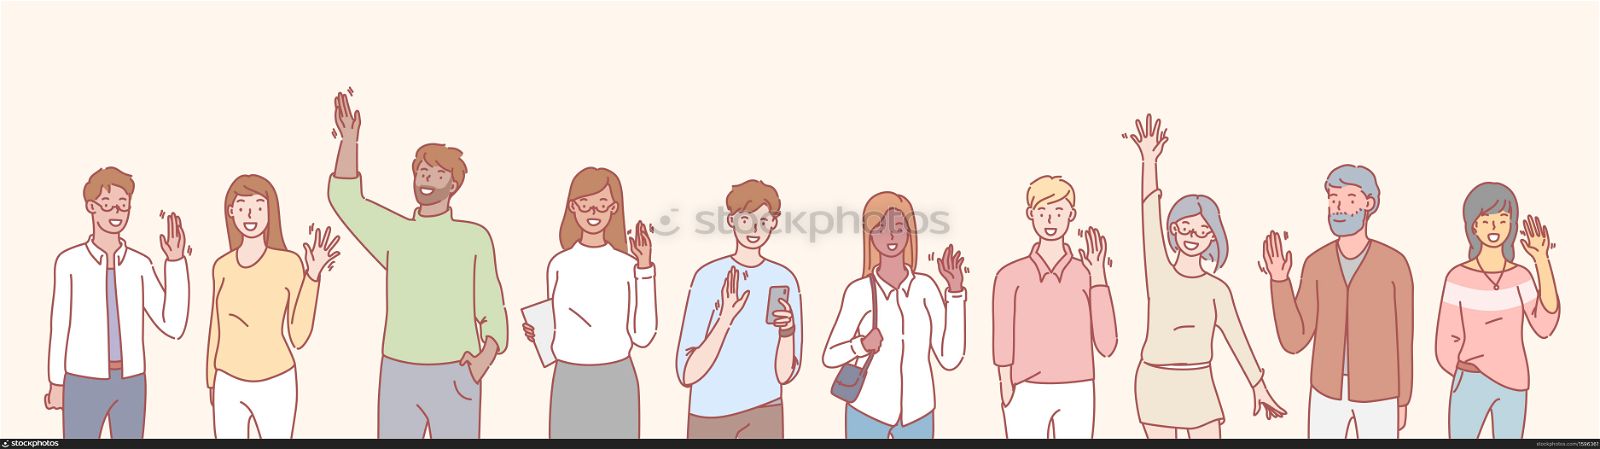 Set of multiethnic people volunteers concept. Group of multinational men and women waving their hands in greeting. Collection of illustrations of people, boys and girls greet, raising hands.. Set of multiethnic people volunteers concept